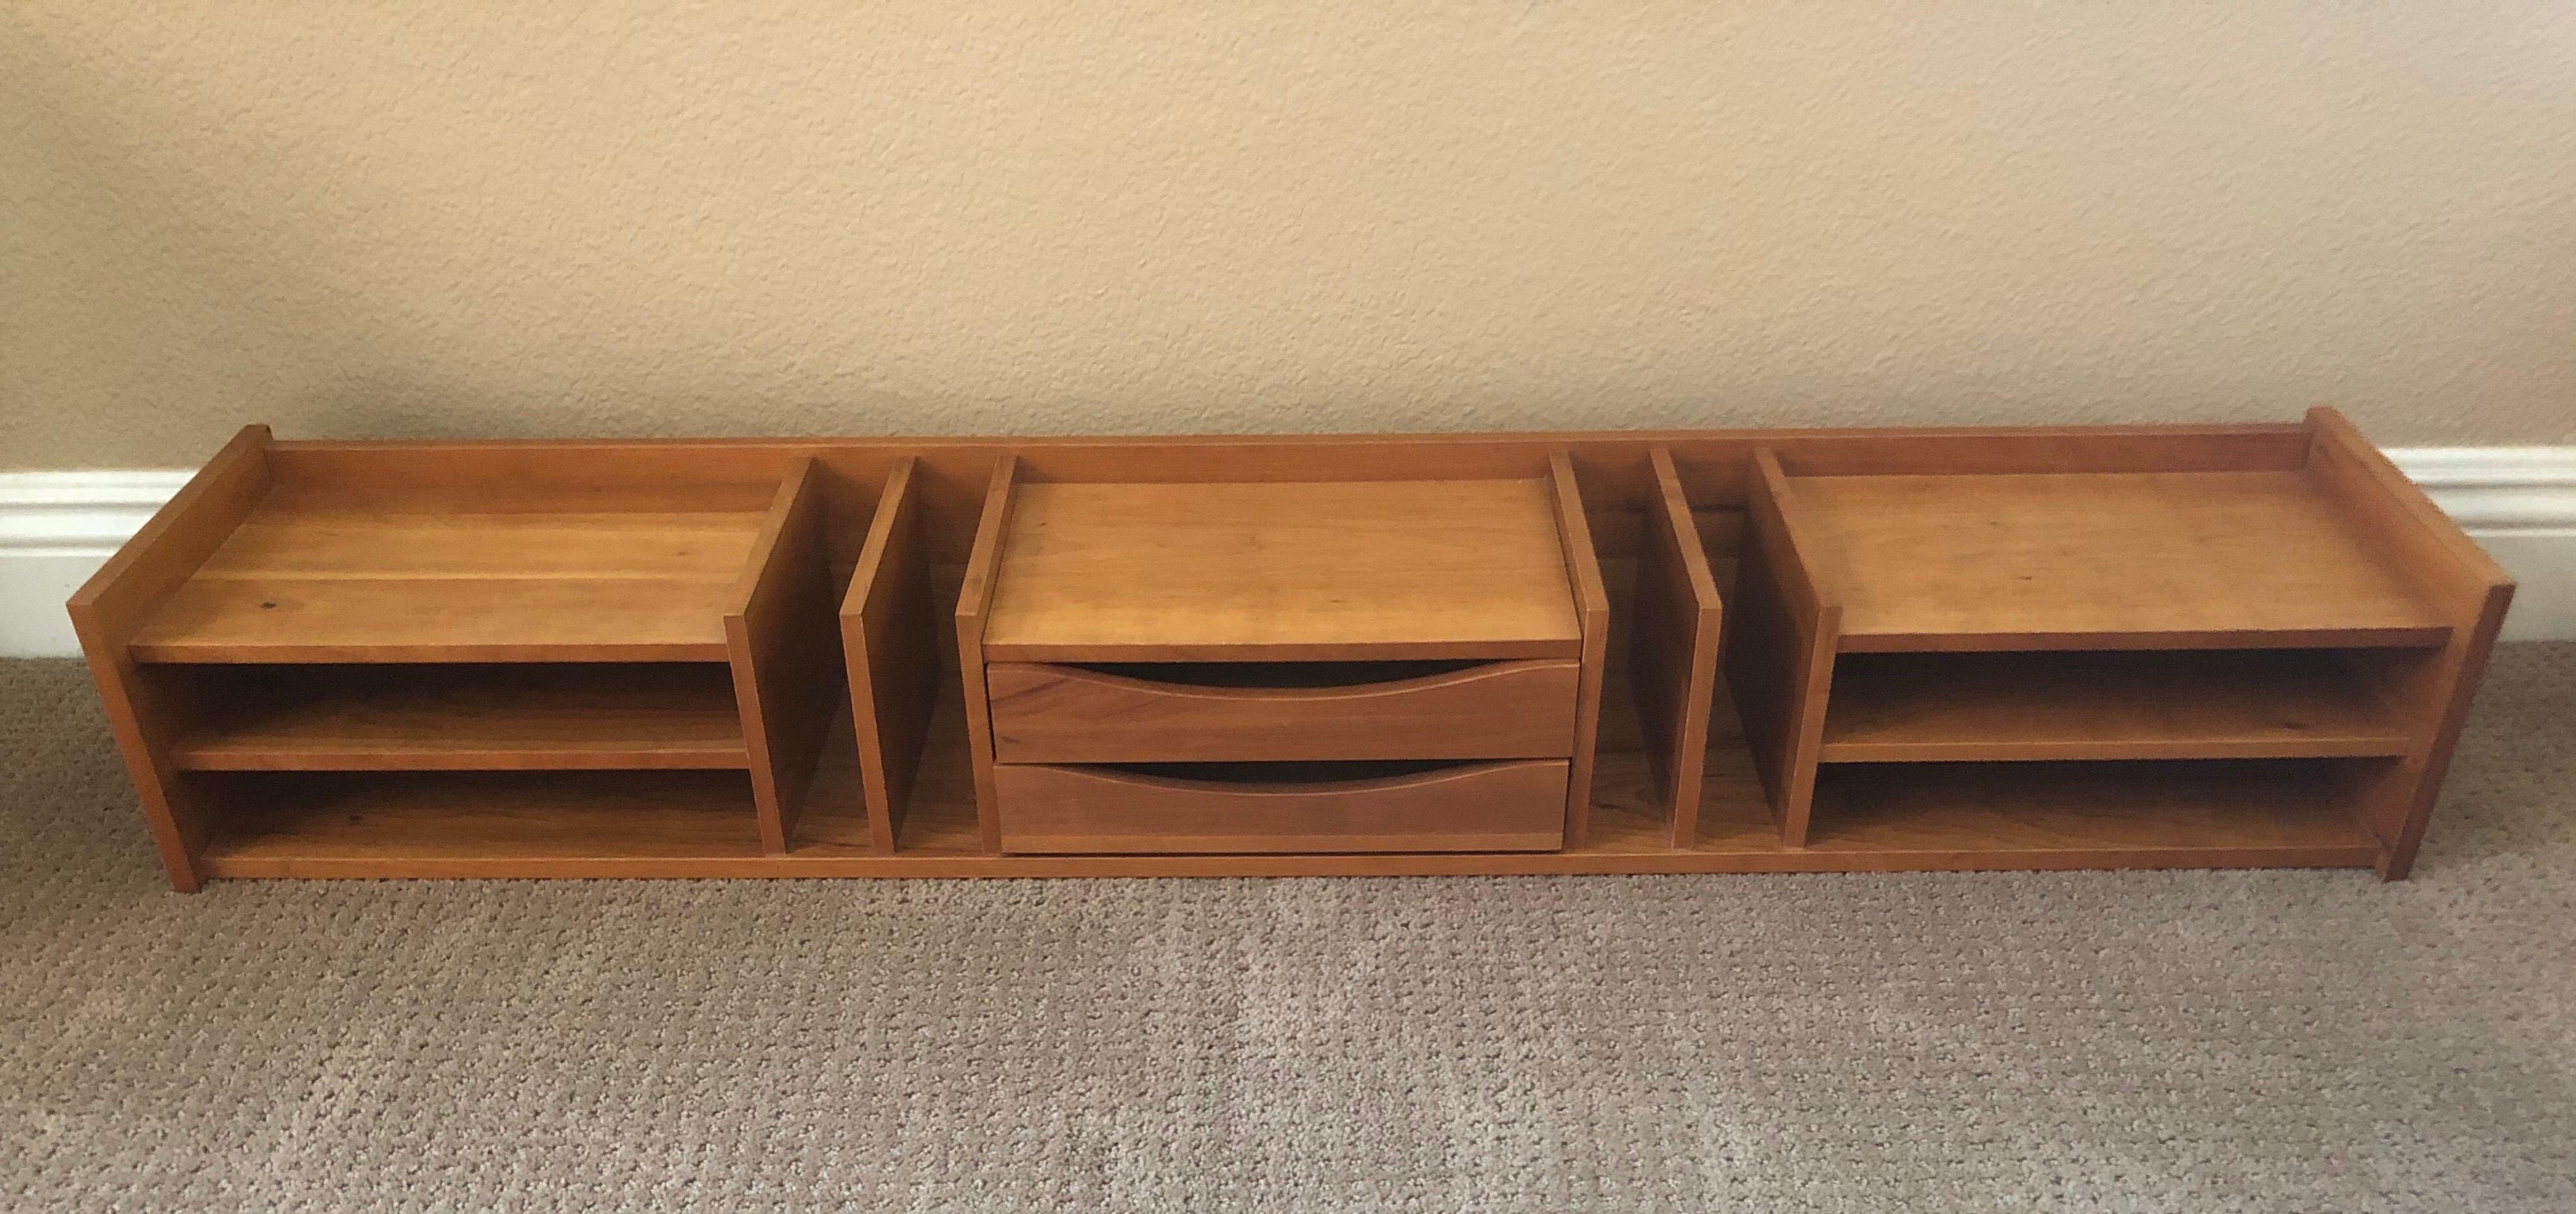 Very functional extra large Danish modern teak desk organizer / letter tray by Pedersen & Hansen, circa 1970s. There are seven horizontal letter trays, four vertical slots and two drawers. The piece is in excellent condition and measures 47.5